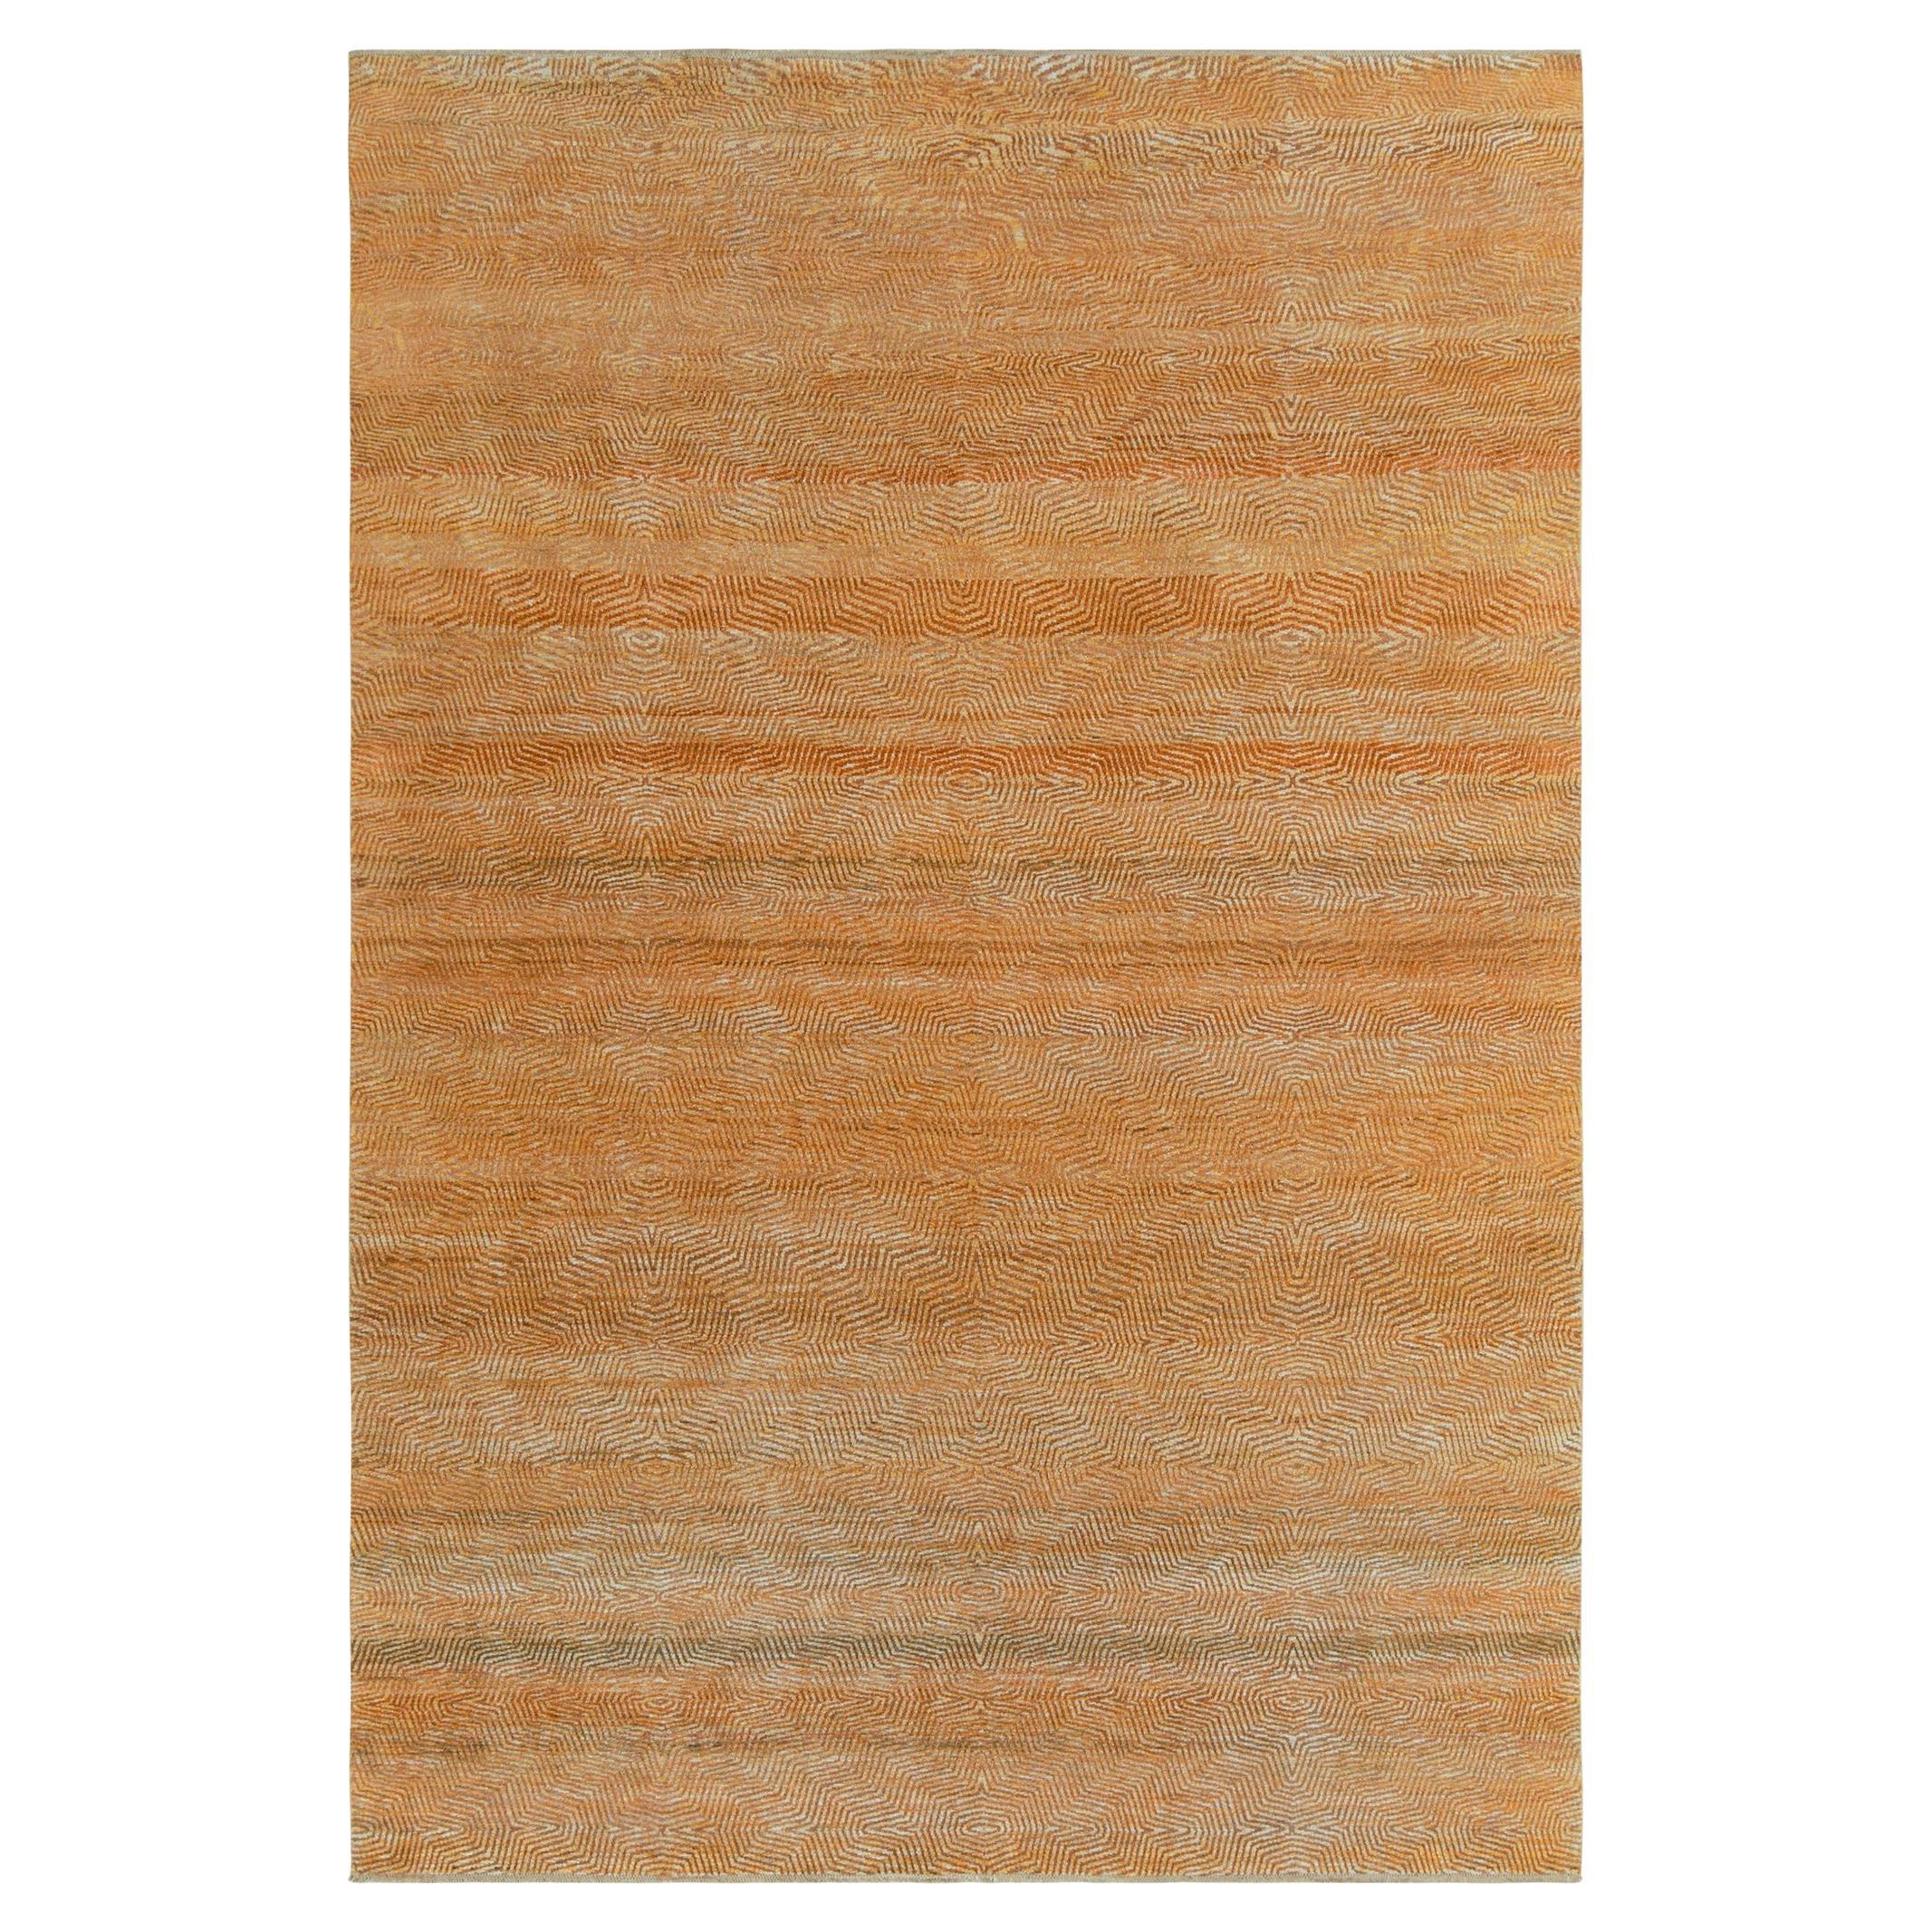 Rug & Kilim’s Hand-Knotted Rug in Gold-Orange, Brown Striations For Sale